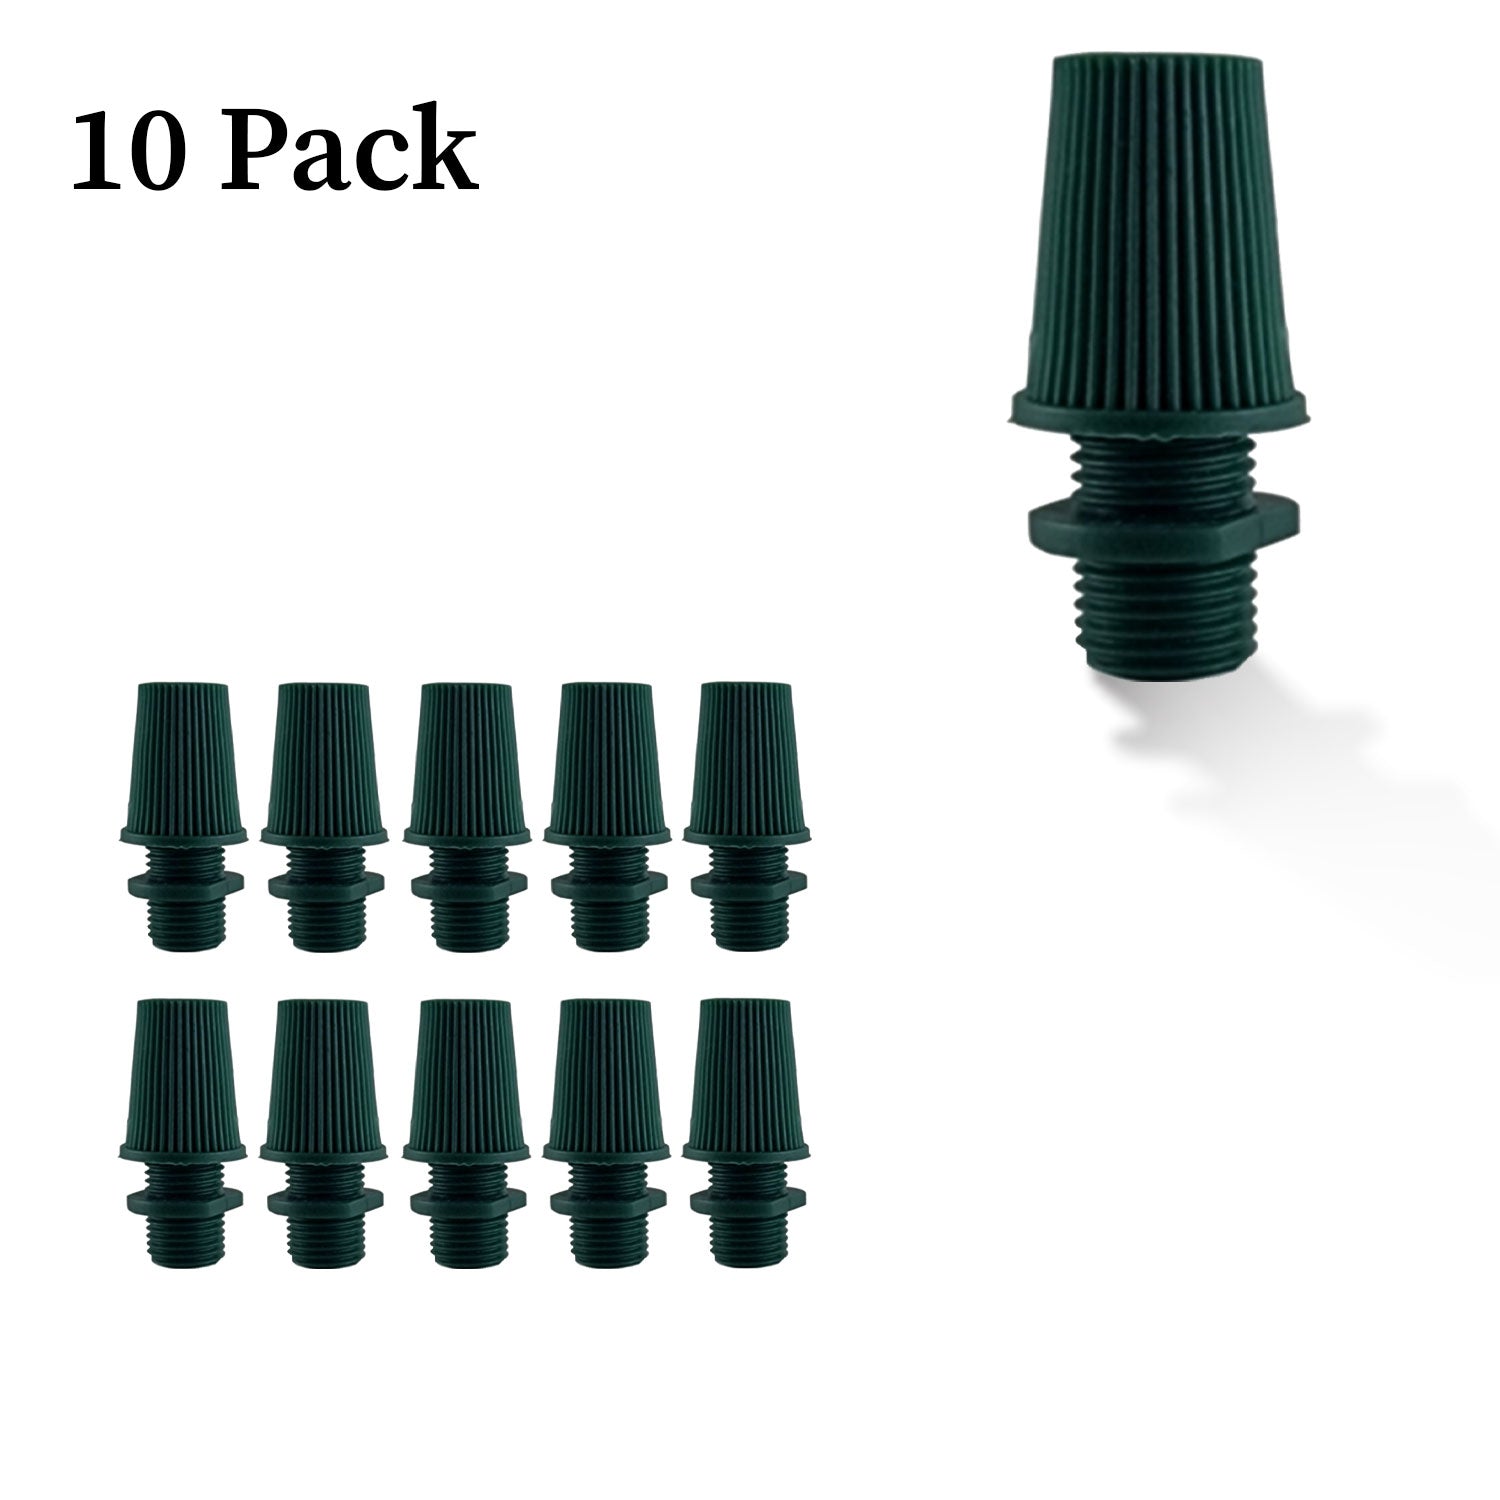 Green 10mm Male Thread Cable Cord Grip Lock